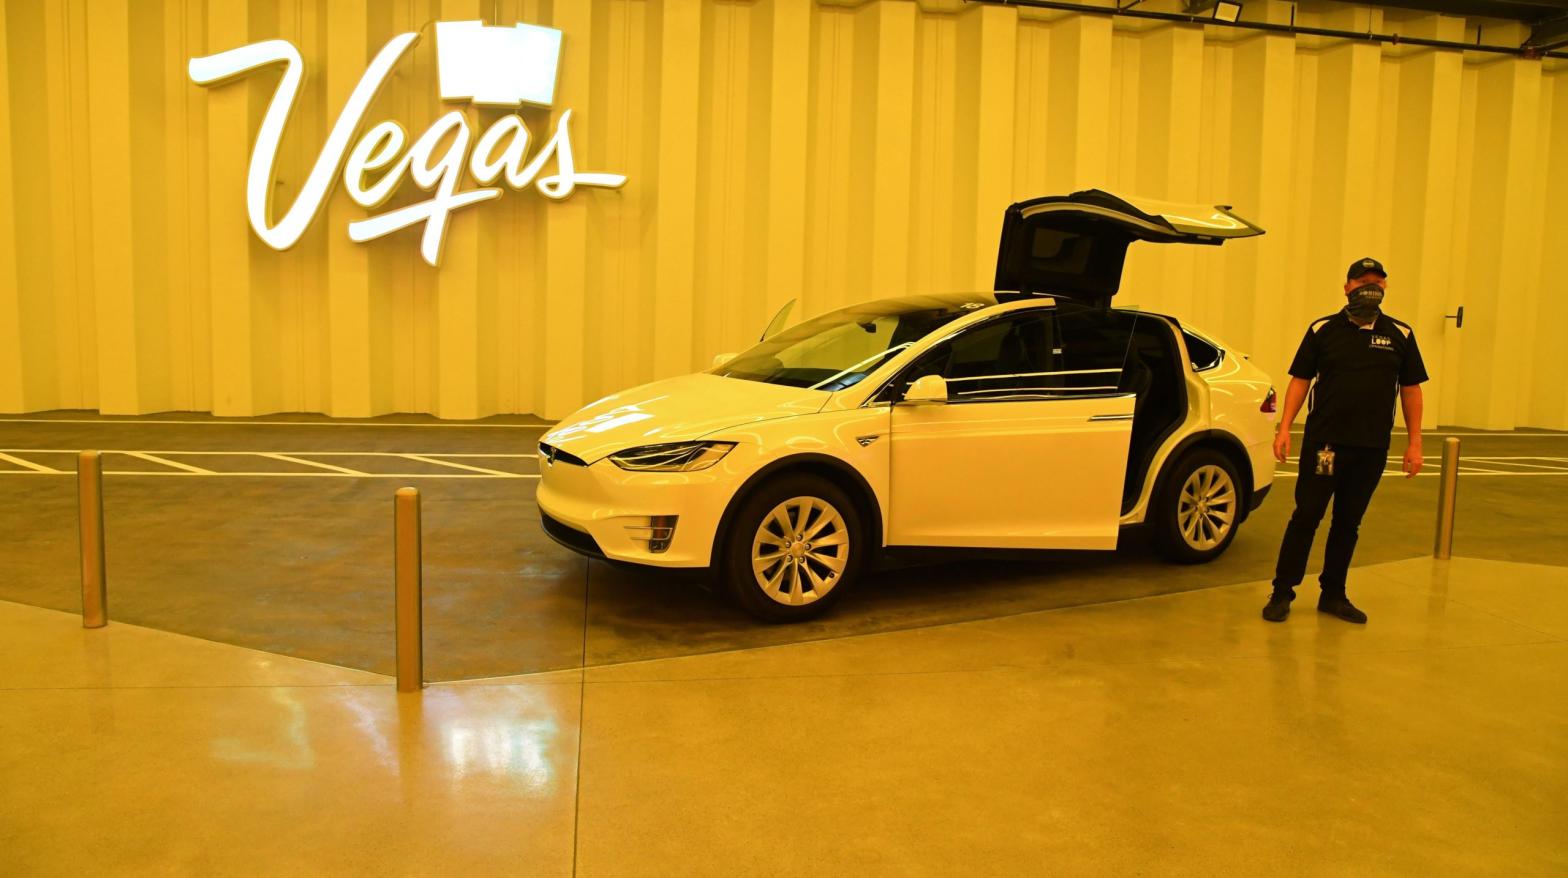 A Tesla Model X is parked in the Central Station during a media preview of the Las Vegas Convention Centre Loop on April 9, 2021 in Las Vegas, Nevada. (Photo: Ethan Miller, Getty Images)